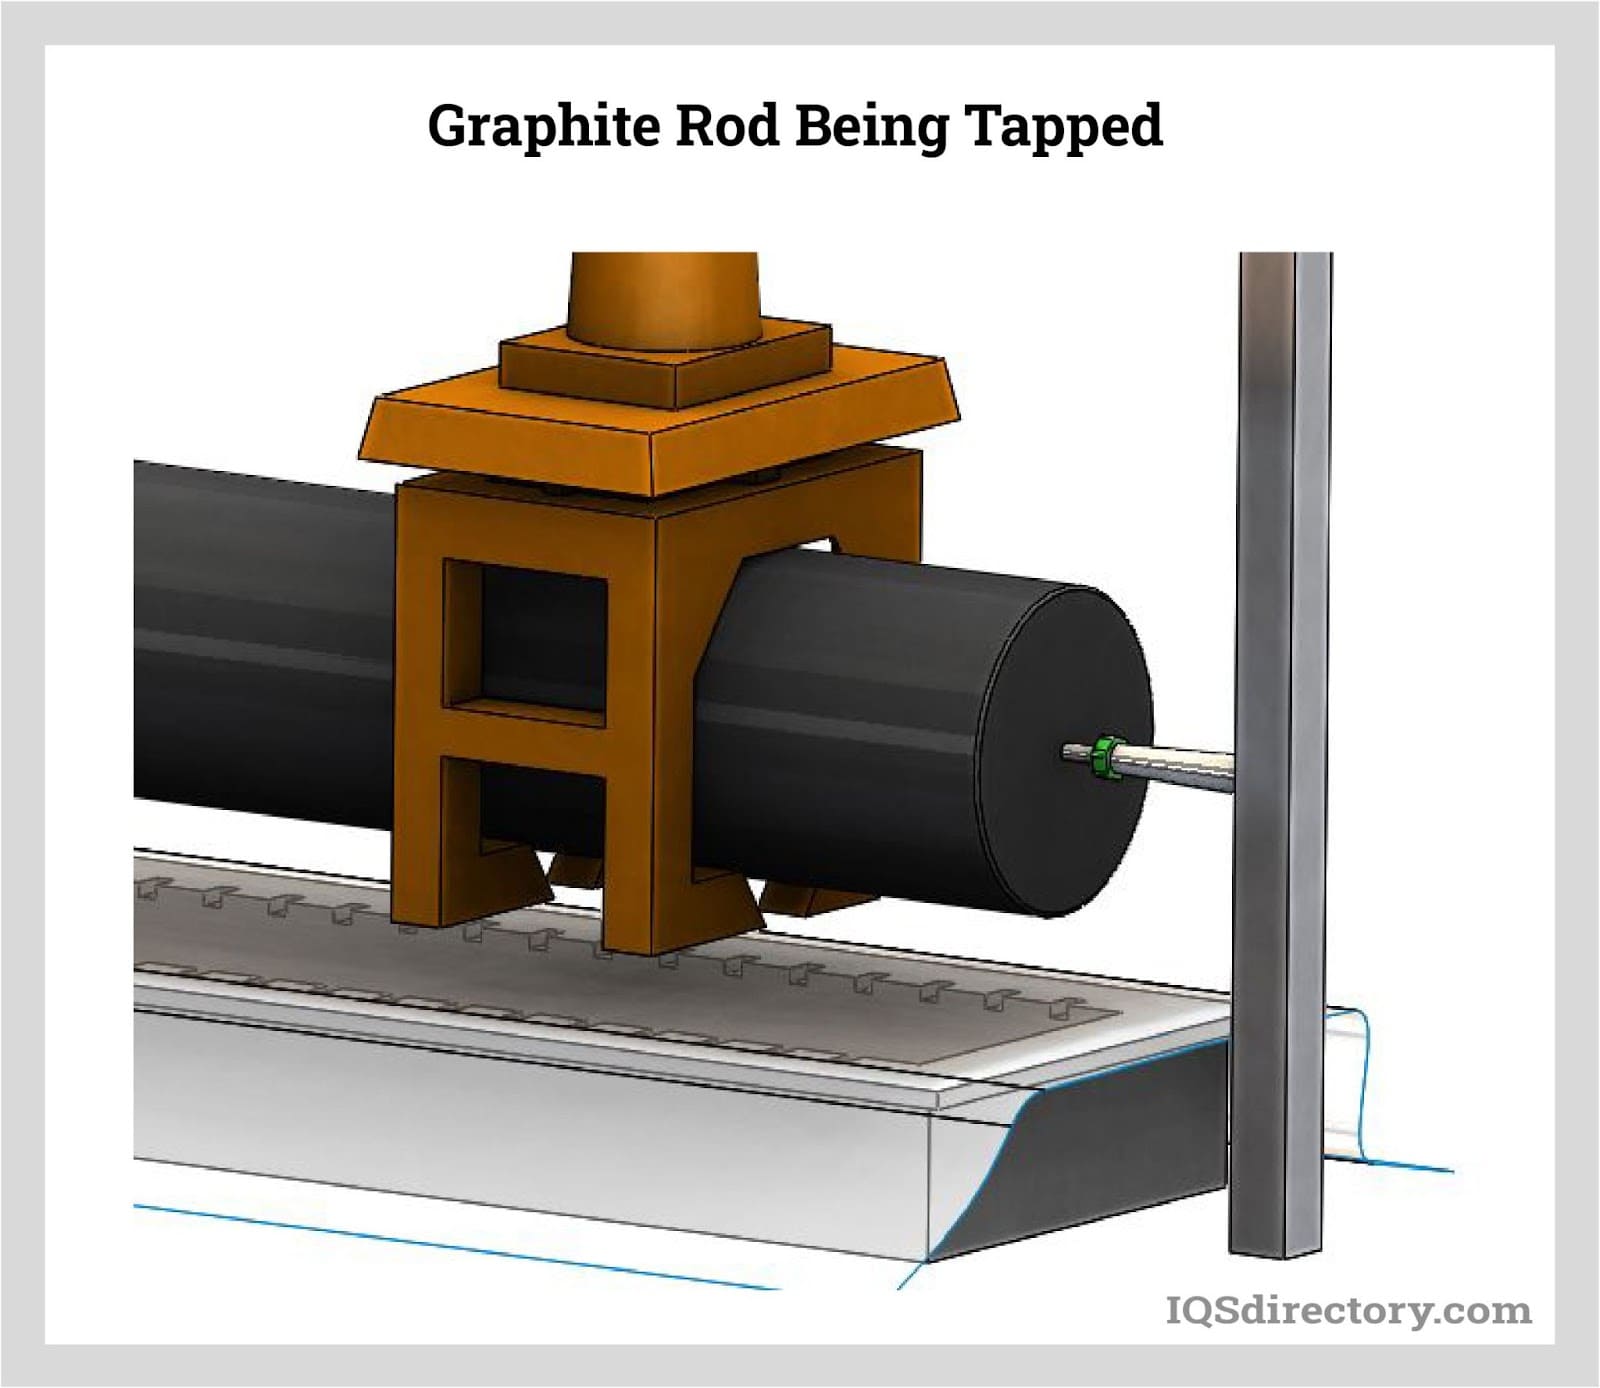 Graphite Rod Being Tapped